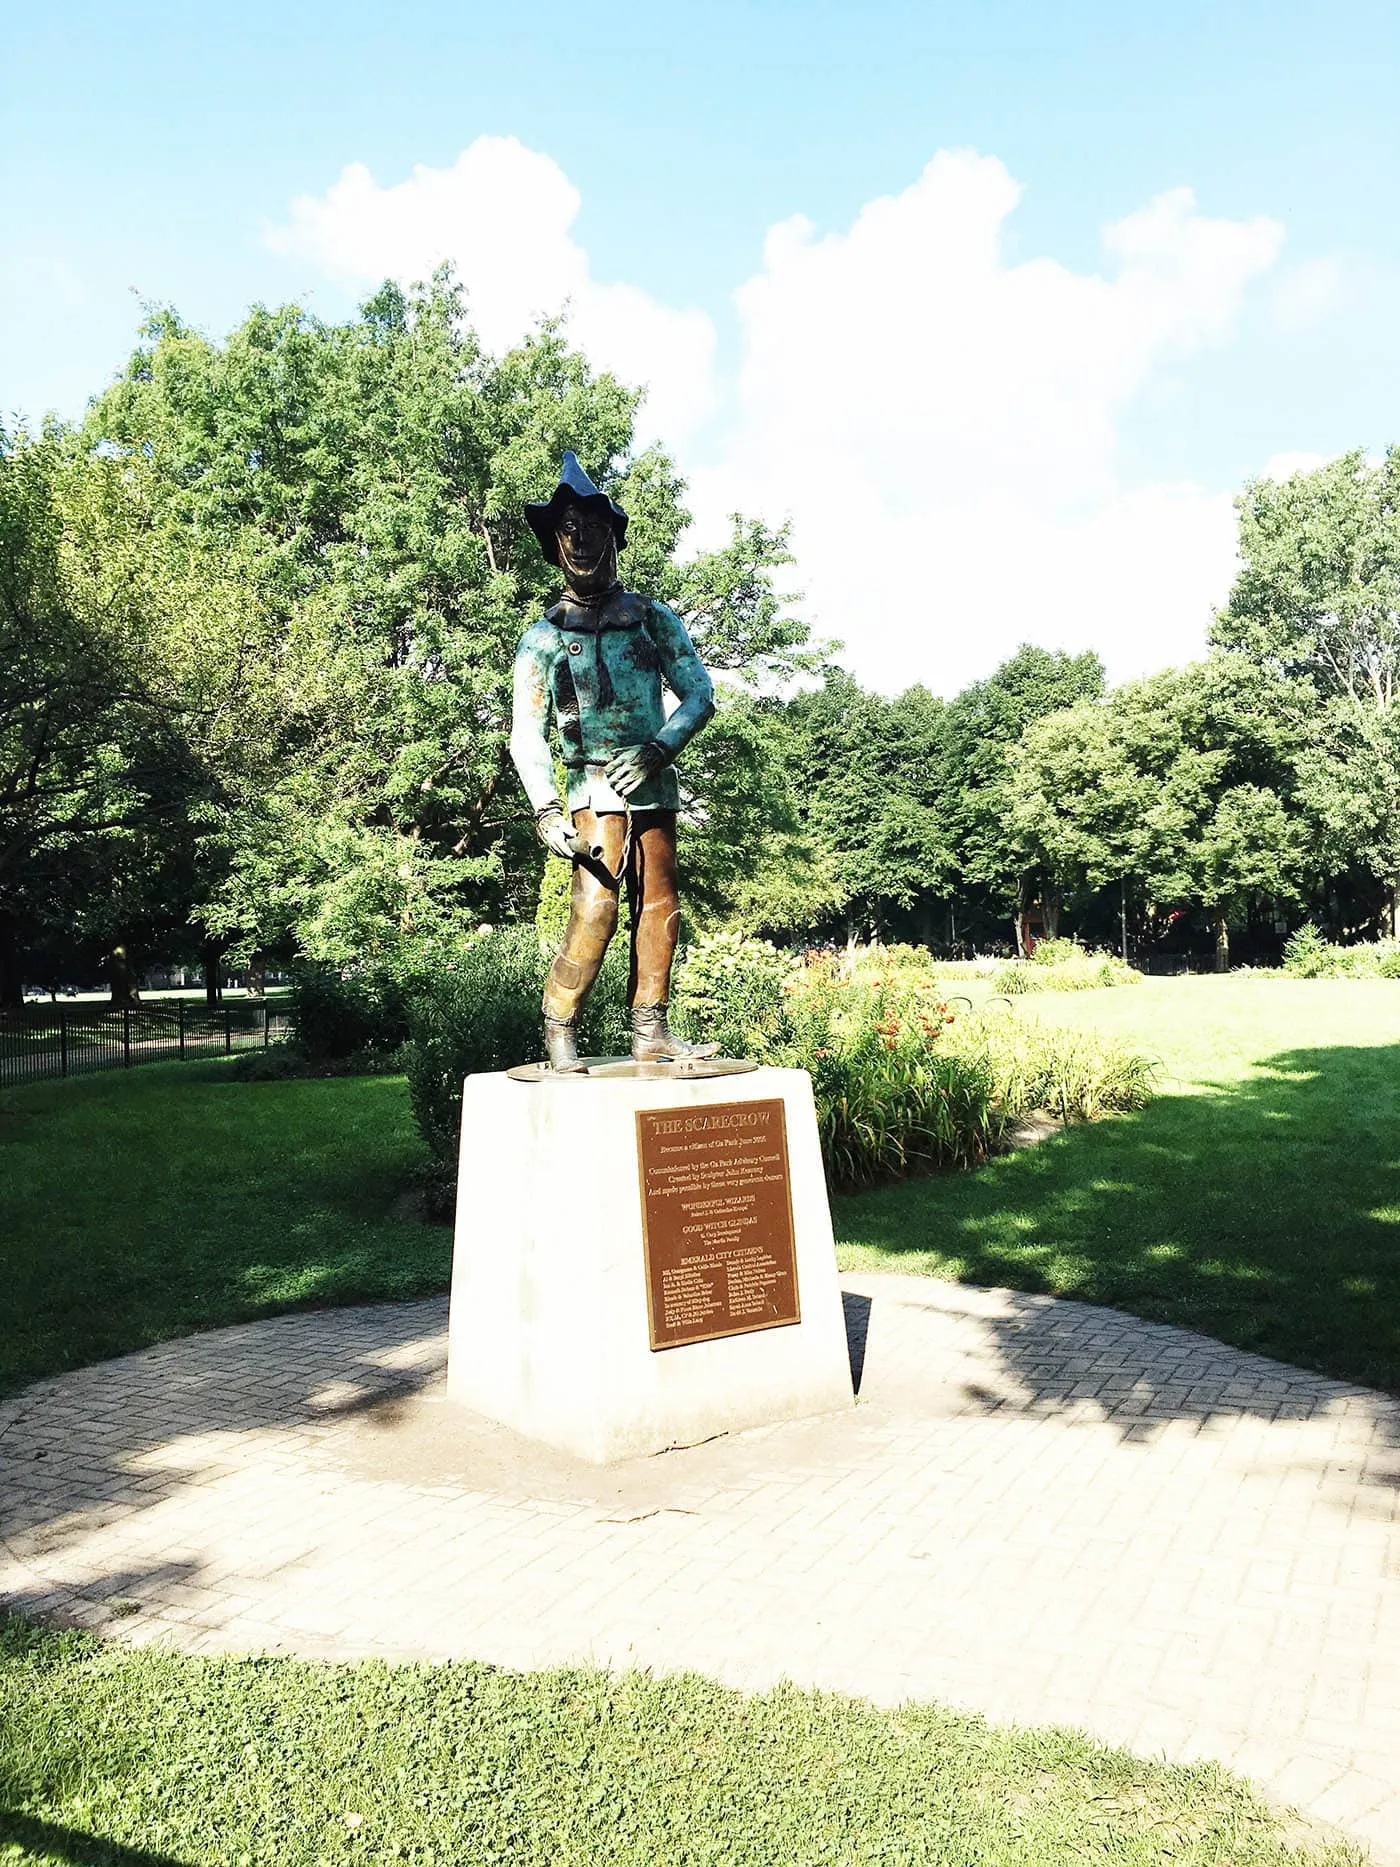 The Scarecrow statue at Oz Park in Chicago, Illinois - a Wizard of Oz themed Park.